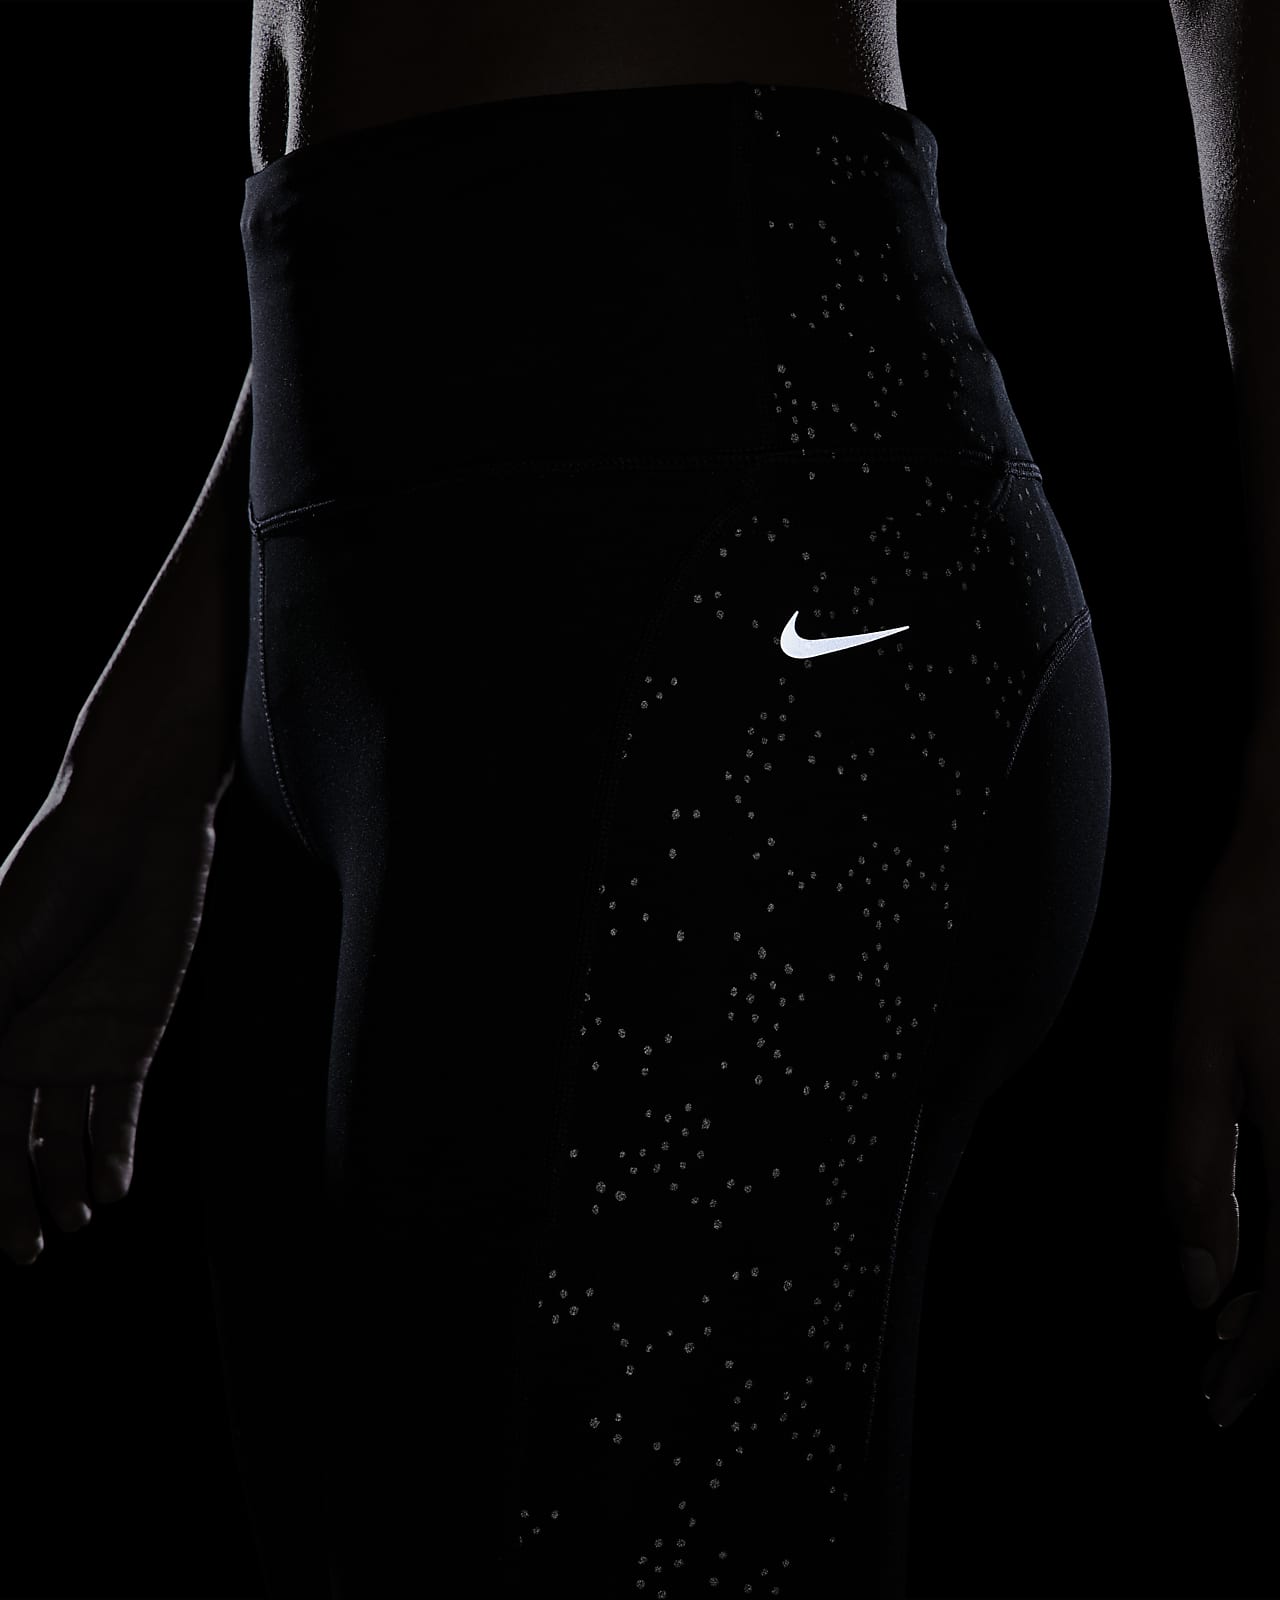 Nike Fast Women's Mid-Rise 7/8 Printed Leggings with Pockets